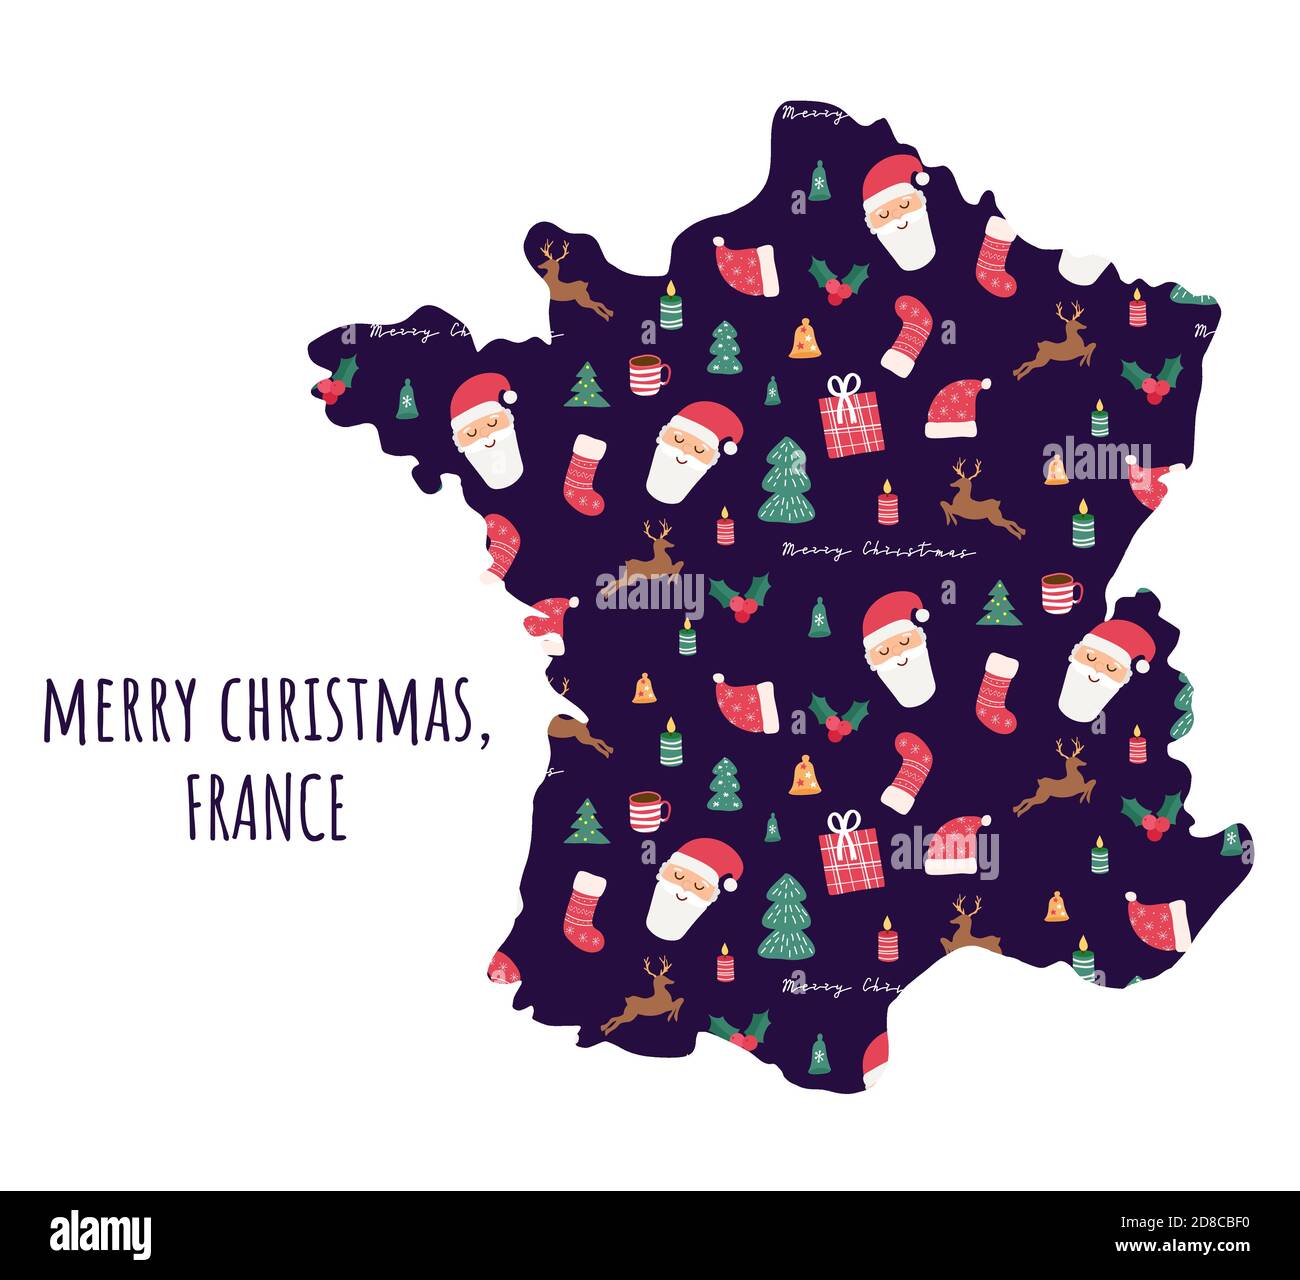 France map with seamless Christmas pattern. Santa Claus, candles, deer, berries, trees. Greeting card with New Year holiday symbol. Cartoon funny Stock Vector